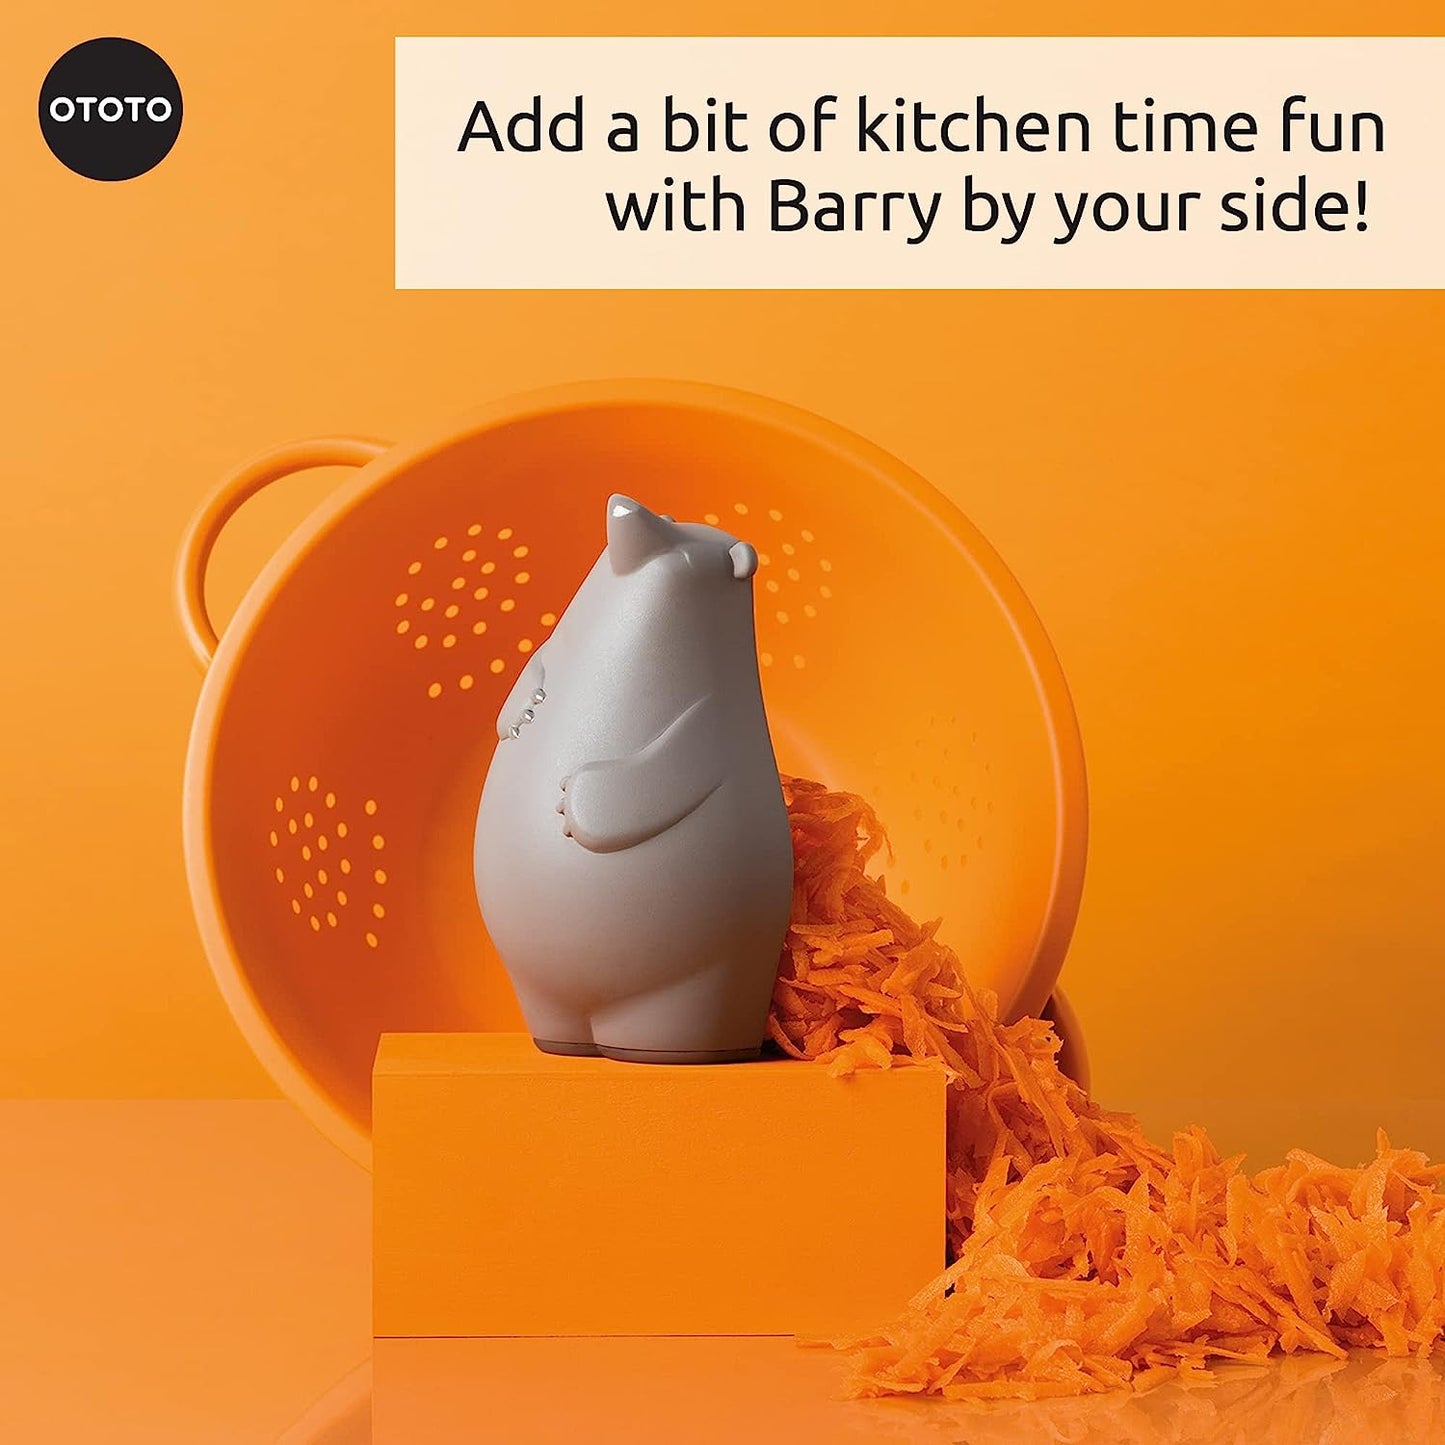 A kitchen grater shaped like a brown bear is sitting on an orange block next to shredded carrot.